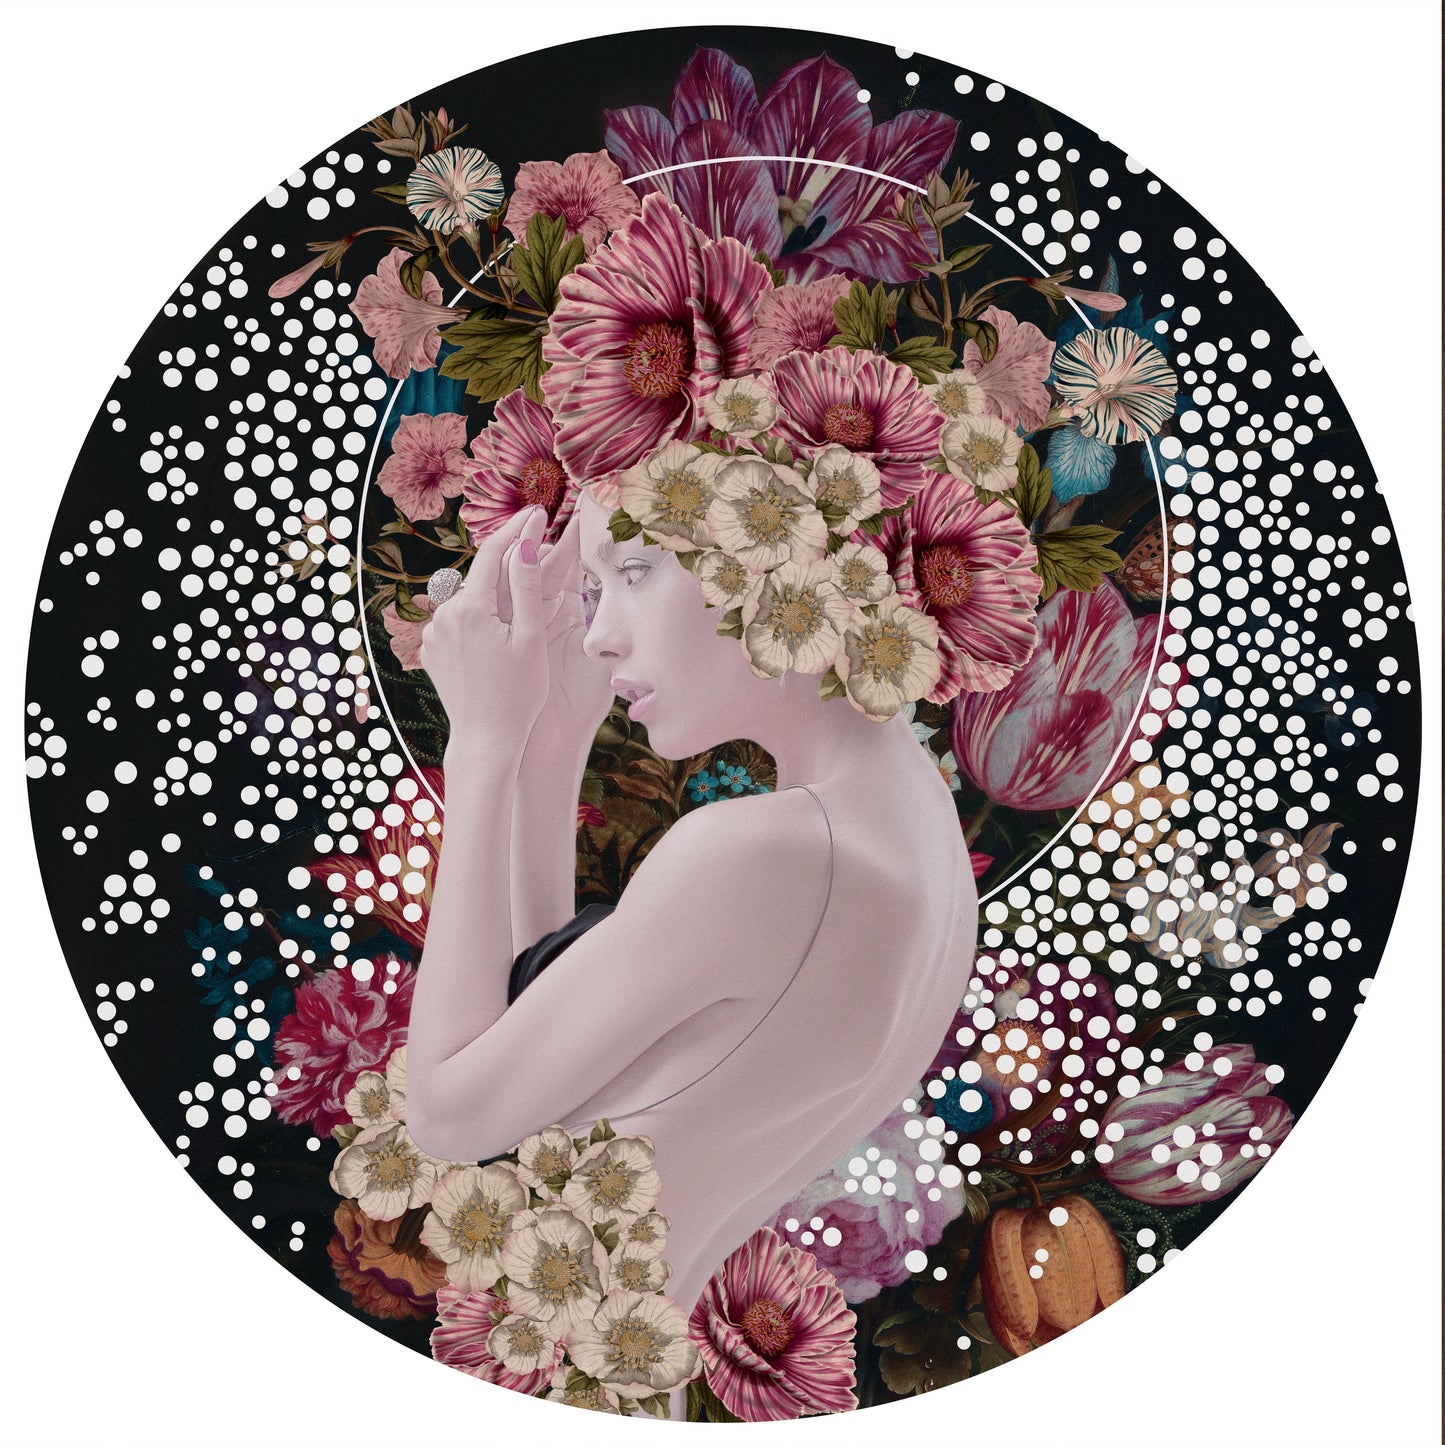 Alexandra-Gallagher-Efforescene-Limited-Edition-TAP-Galleries-Flowers-Figurative-Floral-Rose-Pink